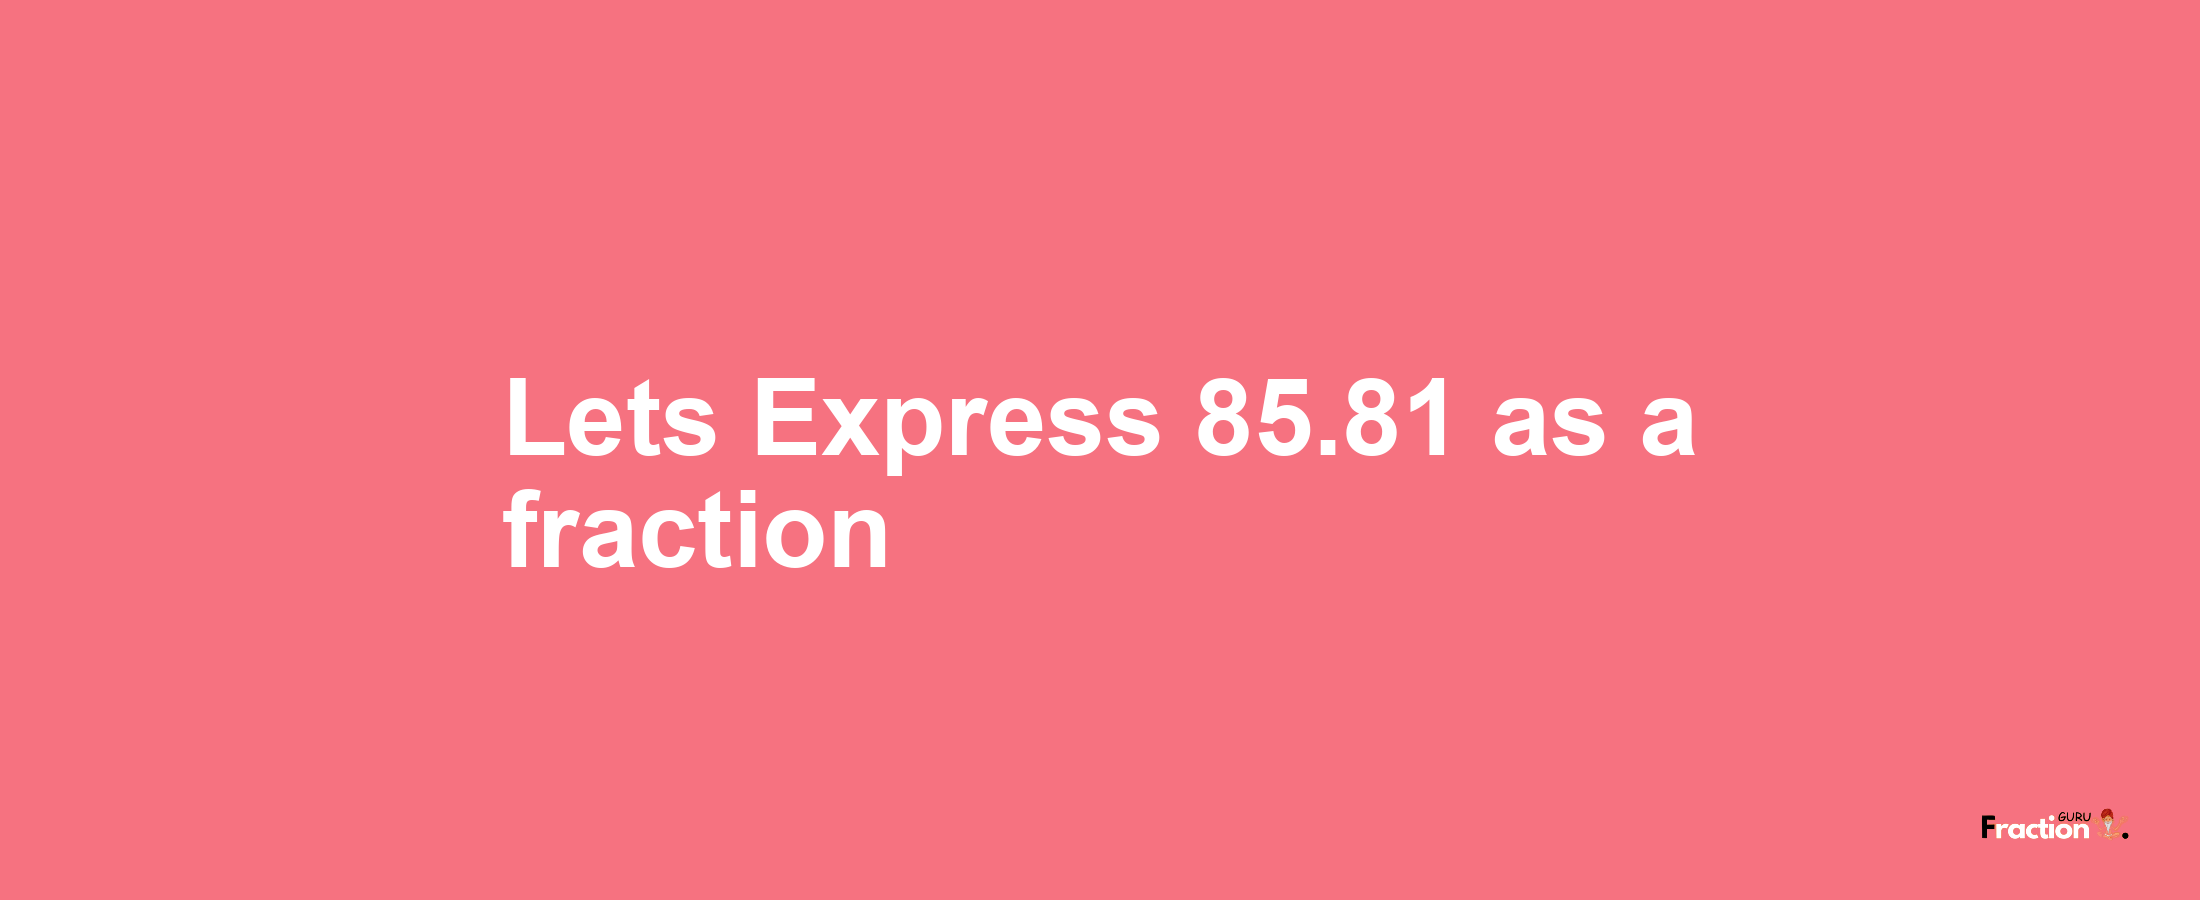 Lets Express 85.81 as afraction